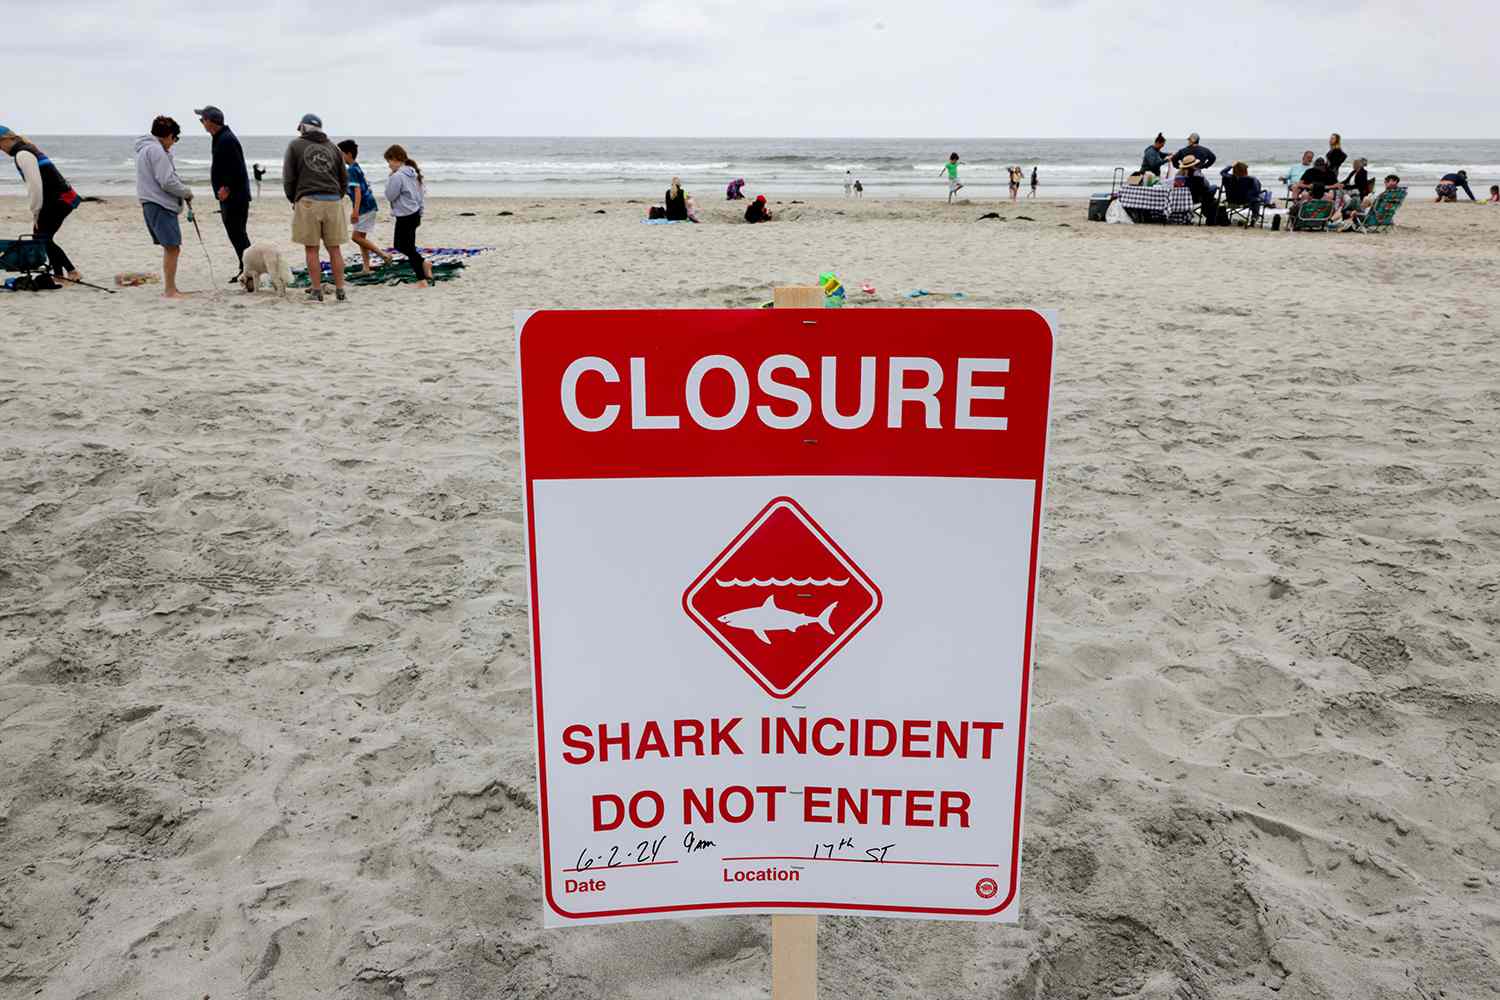 Shark Bites 46-Year-Old Man in California During Group Swim, Leaving Him with 'Significant' Injuries